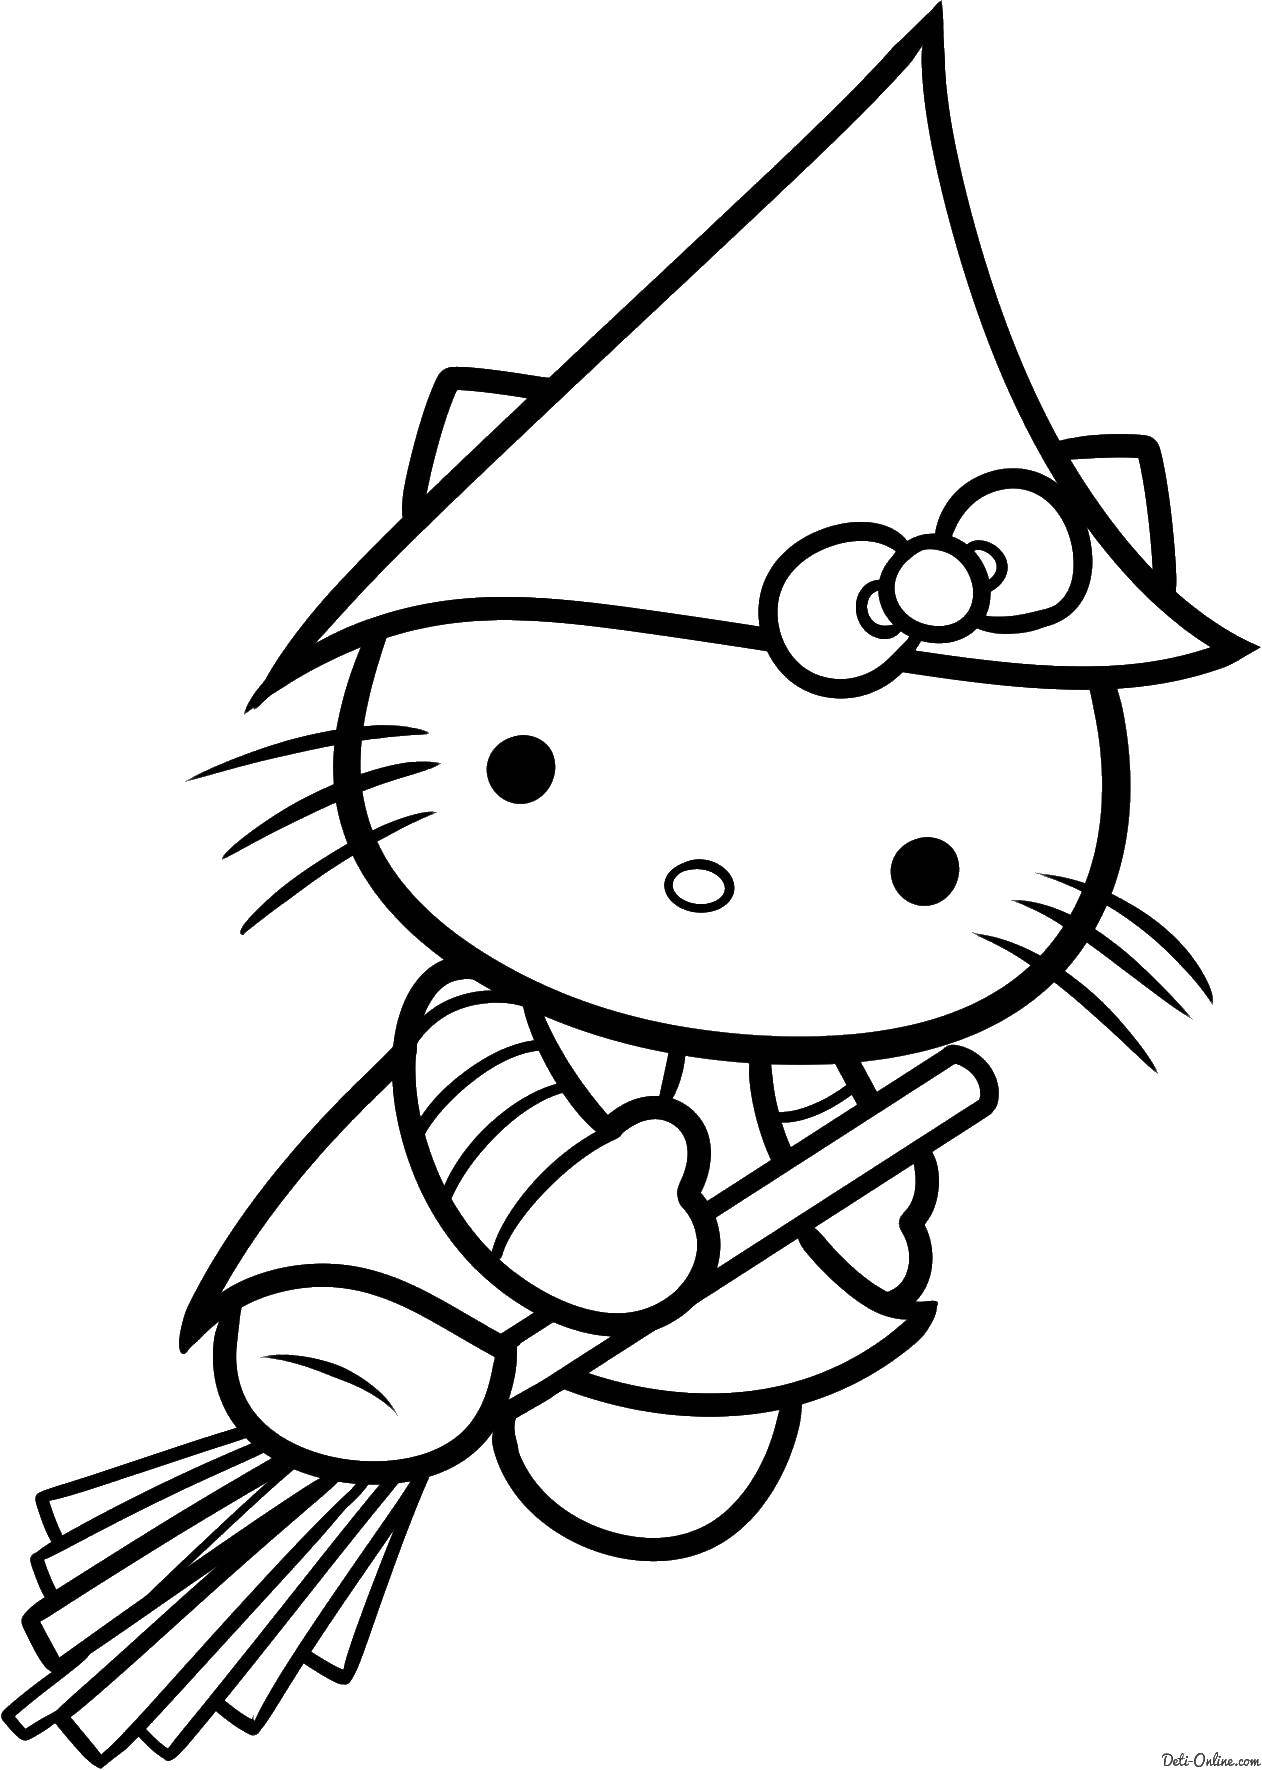 Coloring Kitty witch. Category kitty . Tags:  kitty .